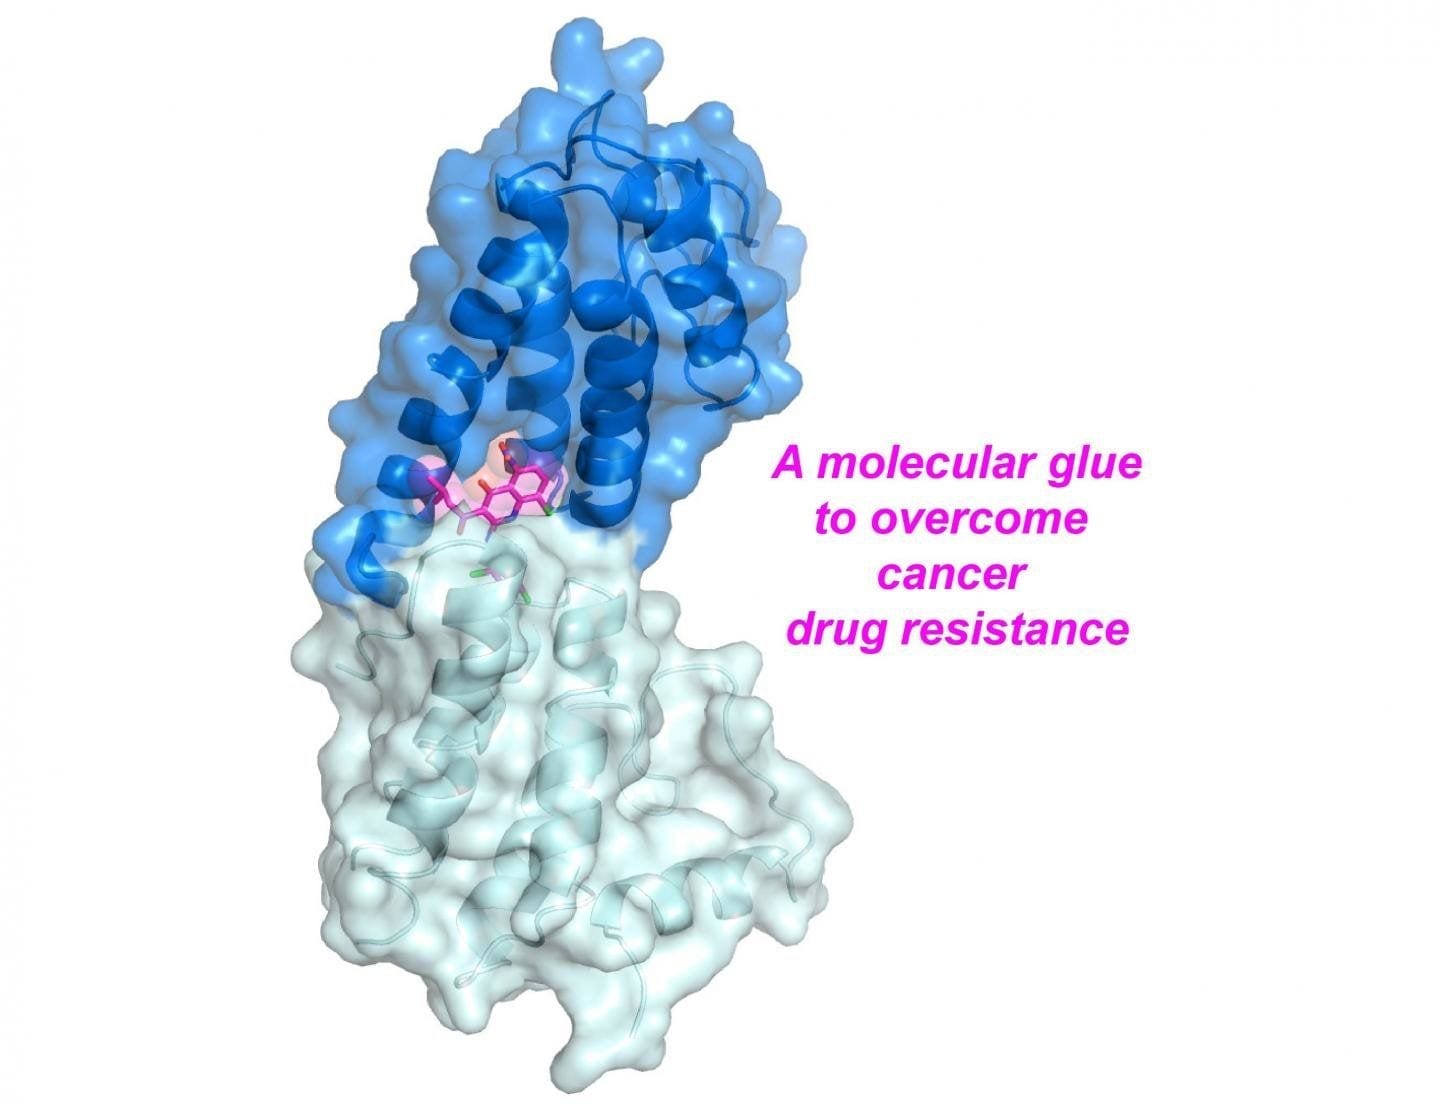 A new small molecule drug could overcome cancer drug resistance